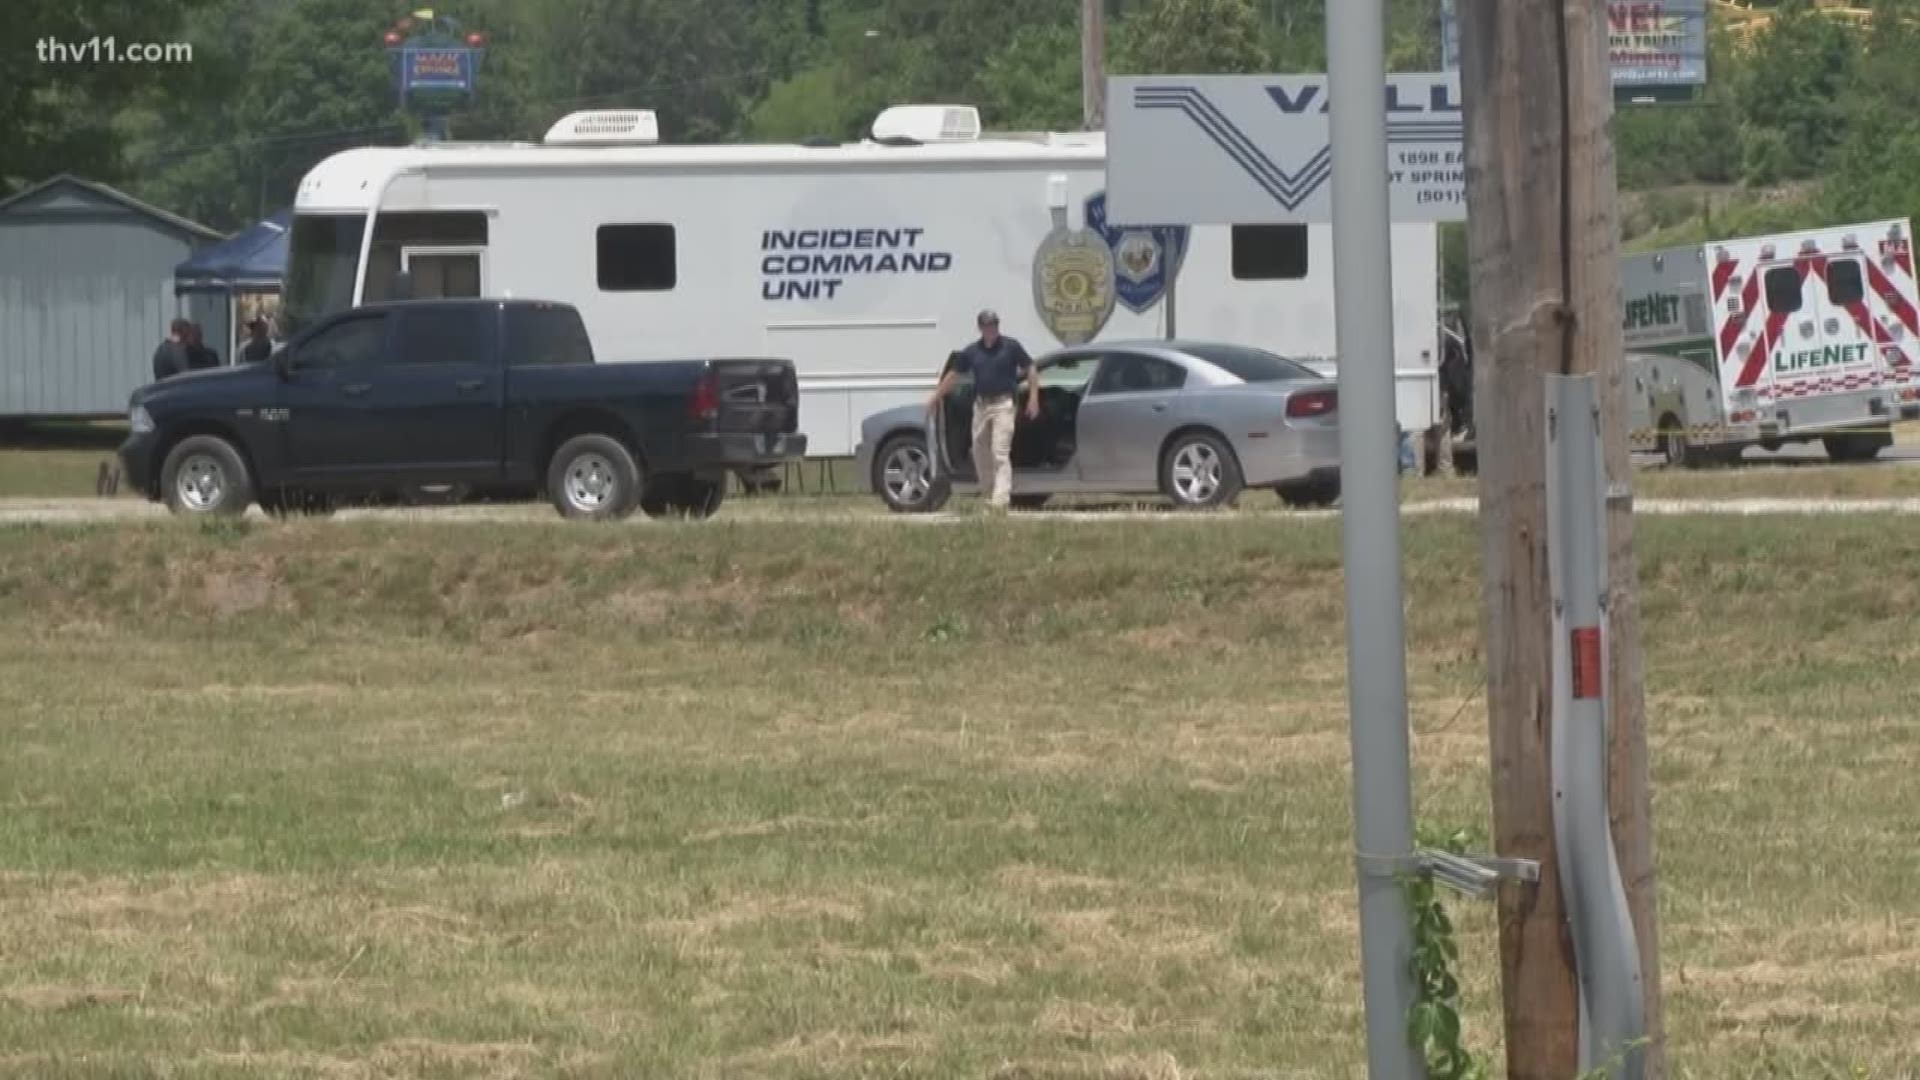 The stand-off lasted more than 10 hours at a mobile home park across from Magic Springs amusement park.